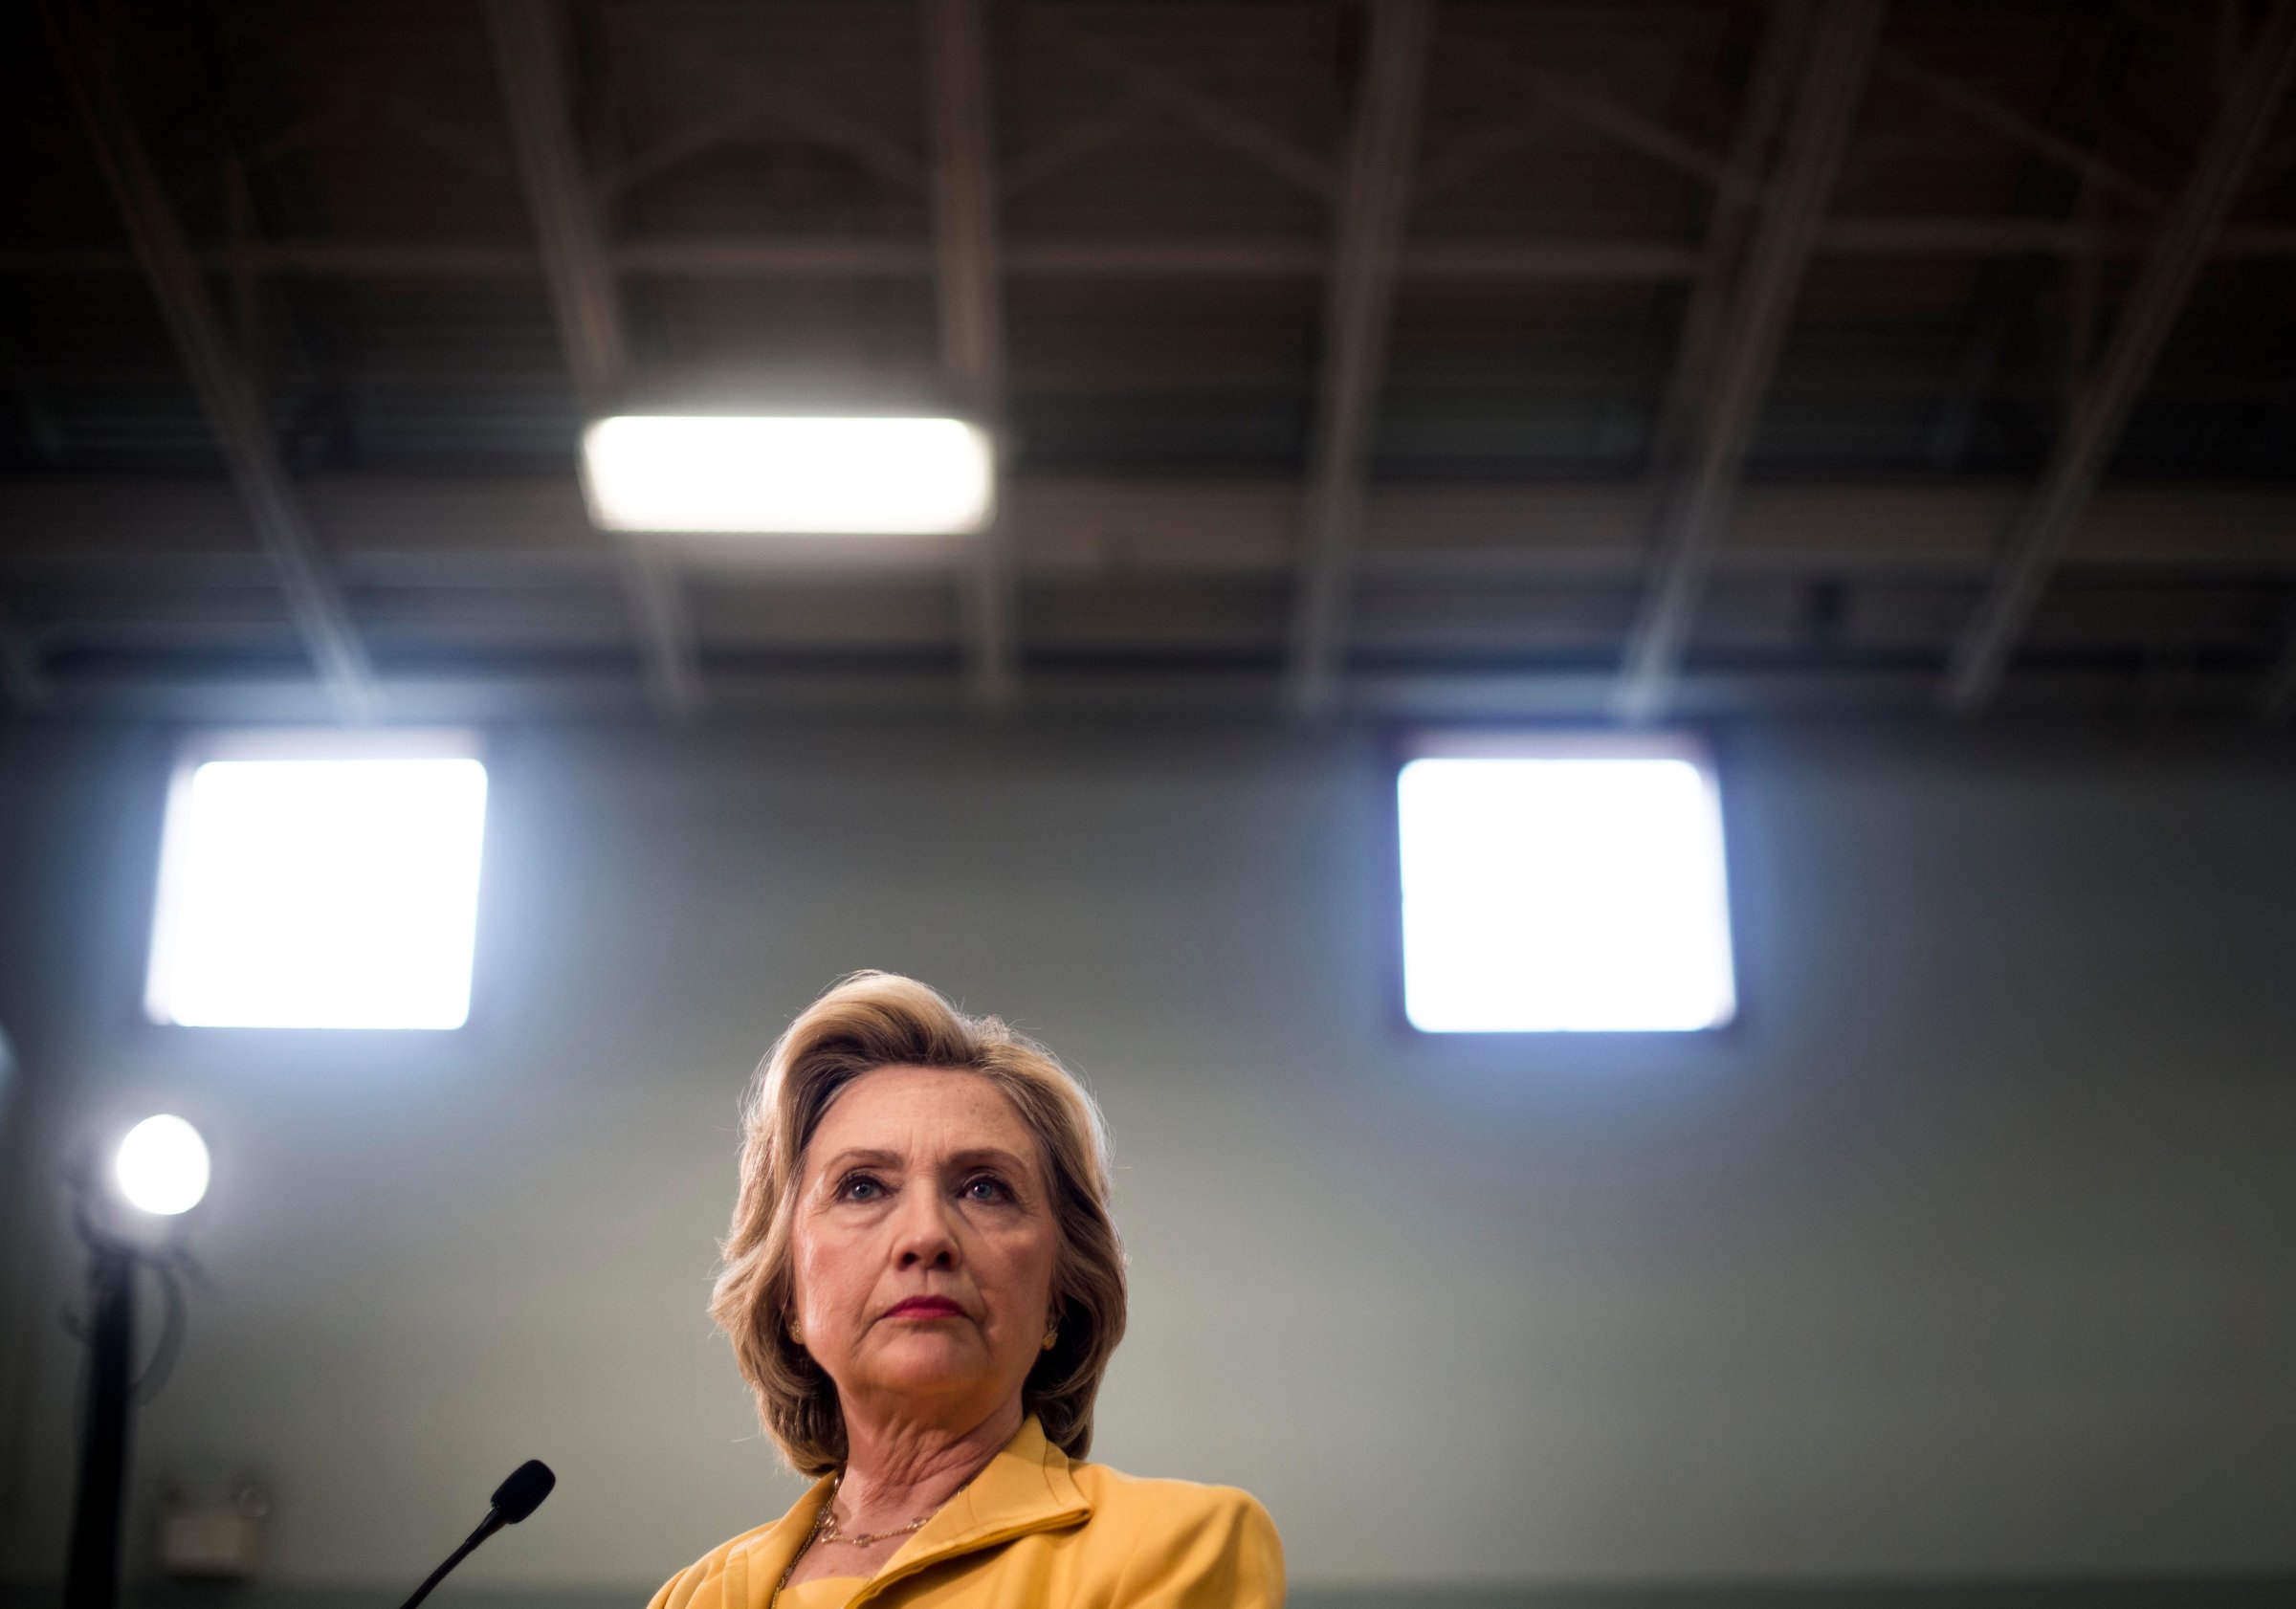 Secretary Hillary Clinton speaks to journalists after a town hall meeting in Nashua, New Hampshire, on July 28, 2015.